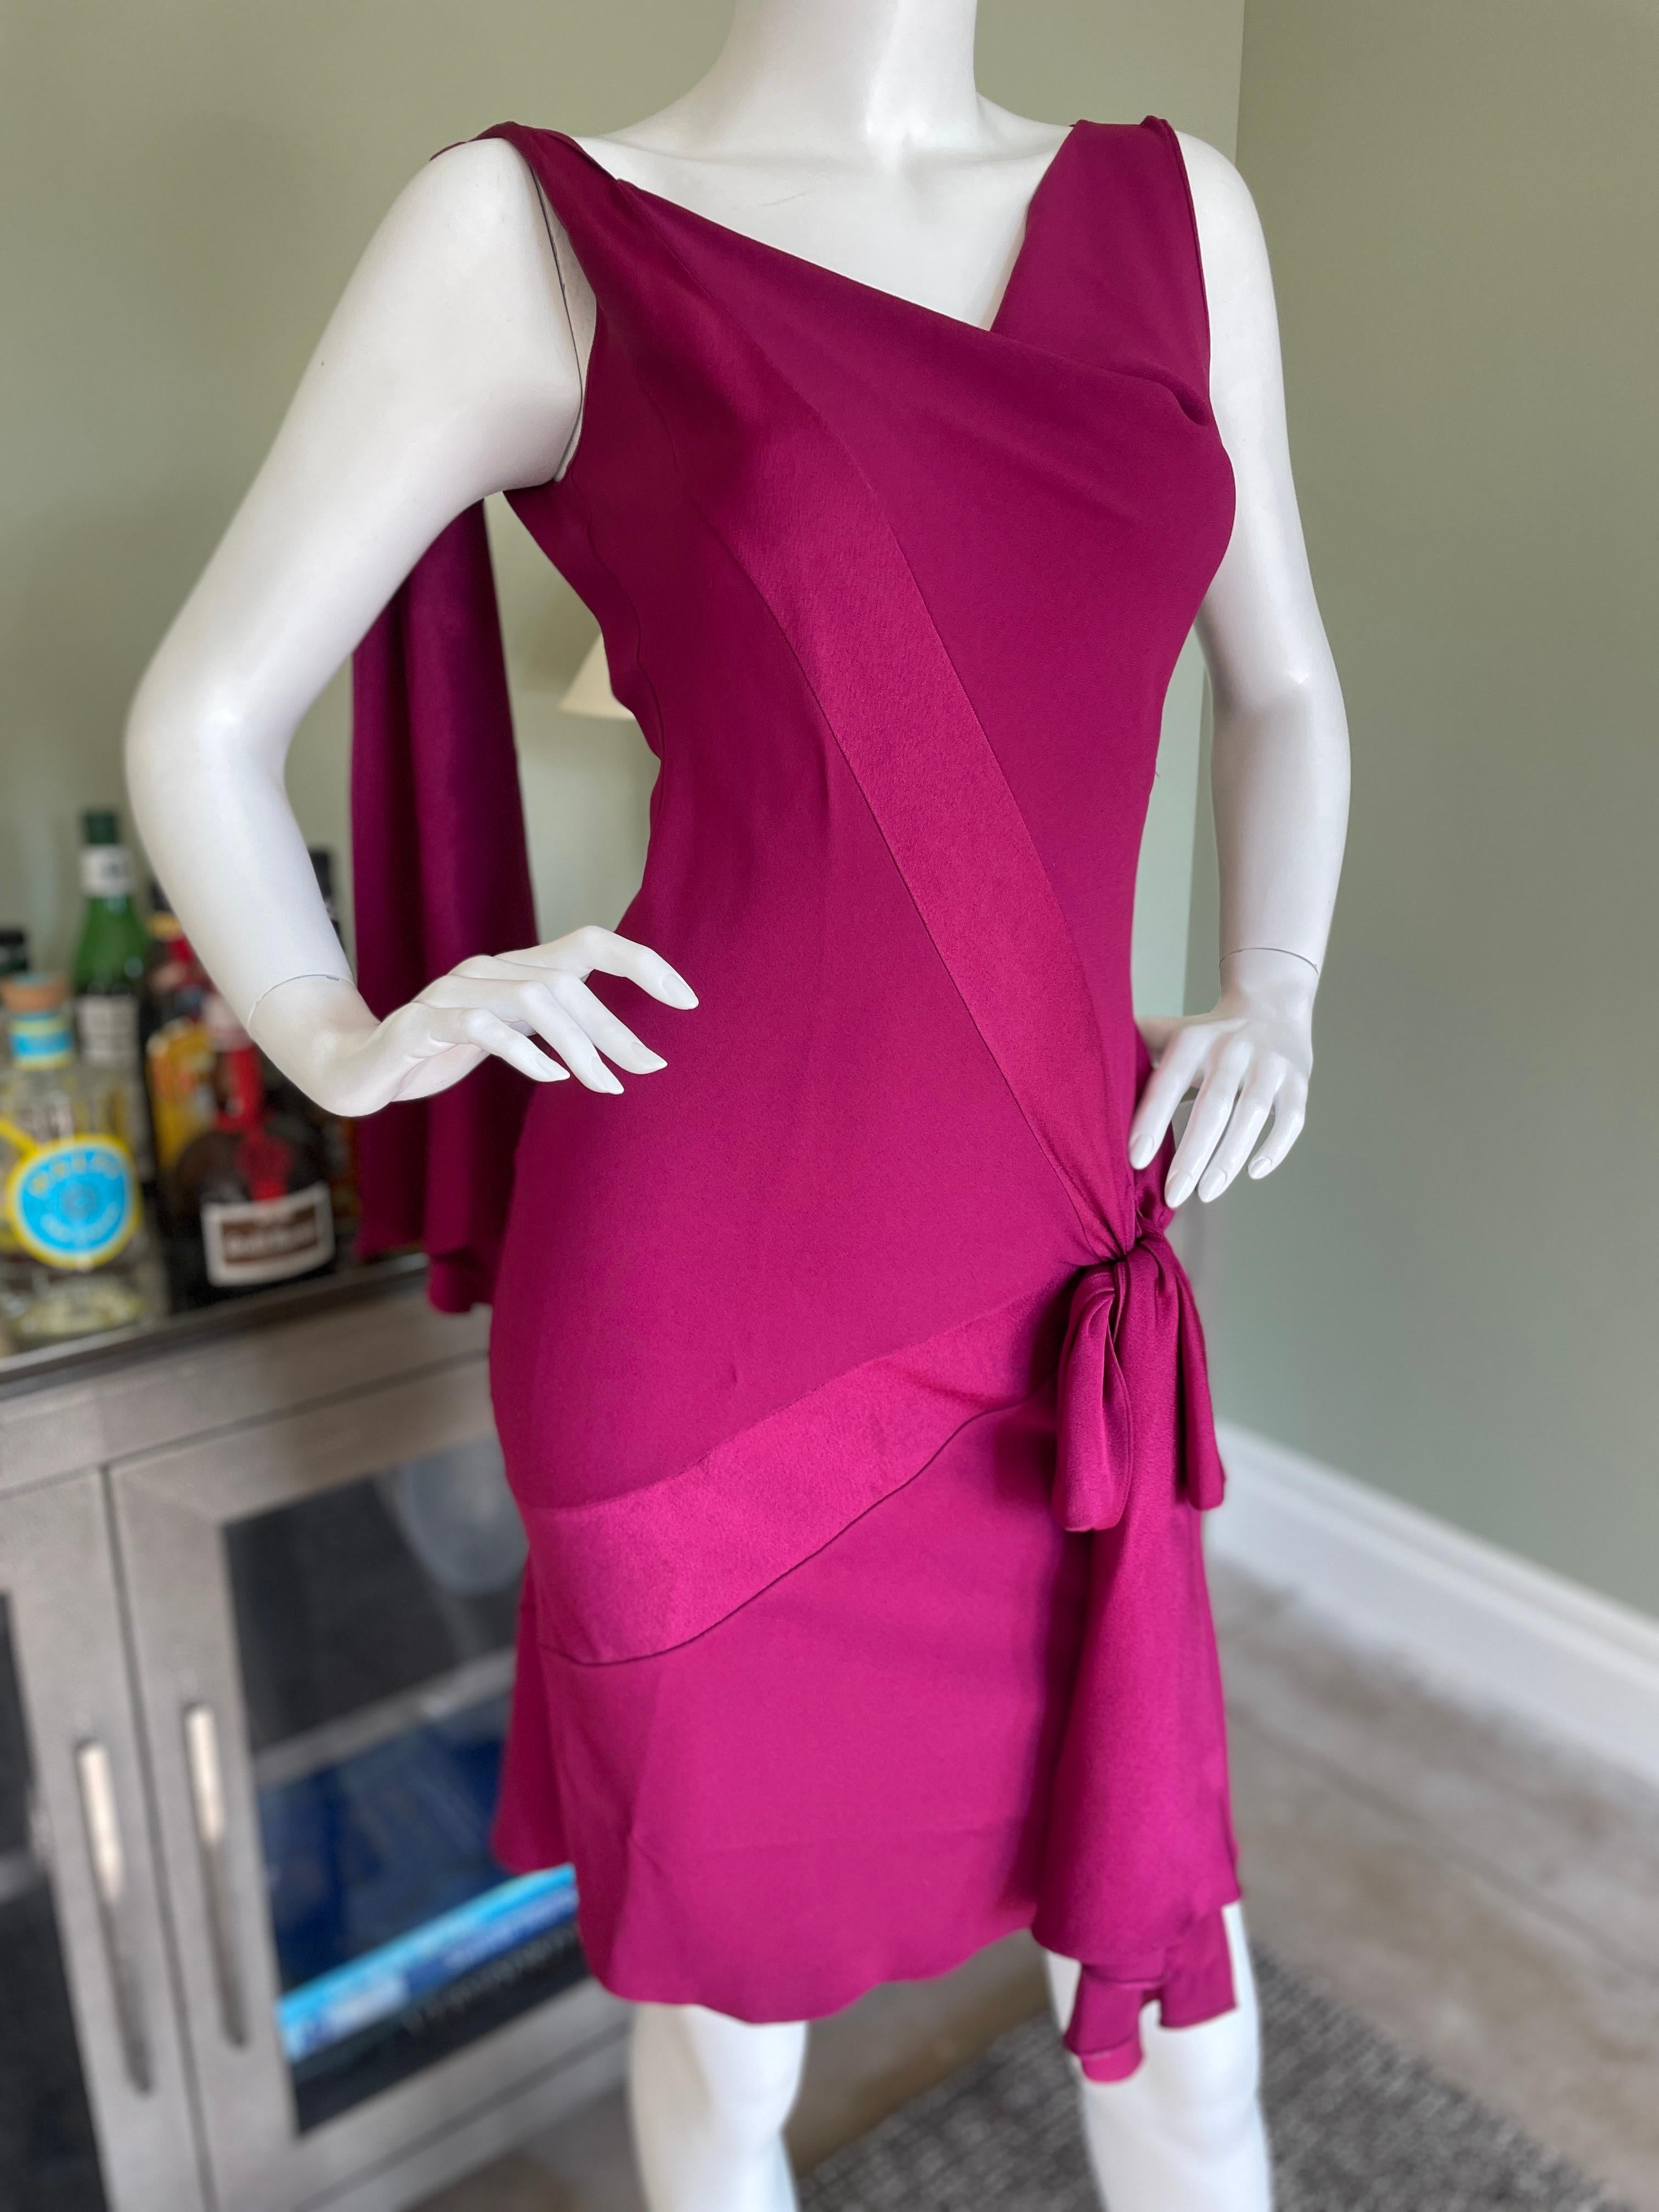  John Galliano Elegant Vintage 2004 Bias Cut Pink Evening Dress  In Excellent Condition For Sale In Cloverdale, CA